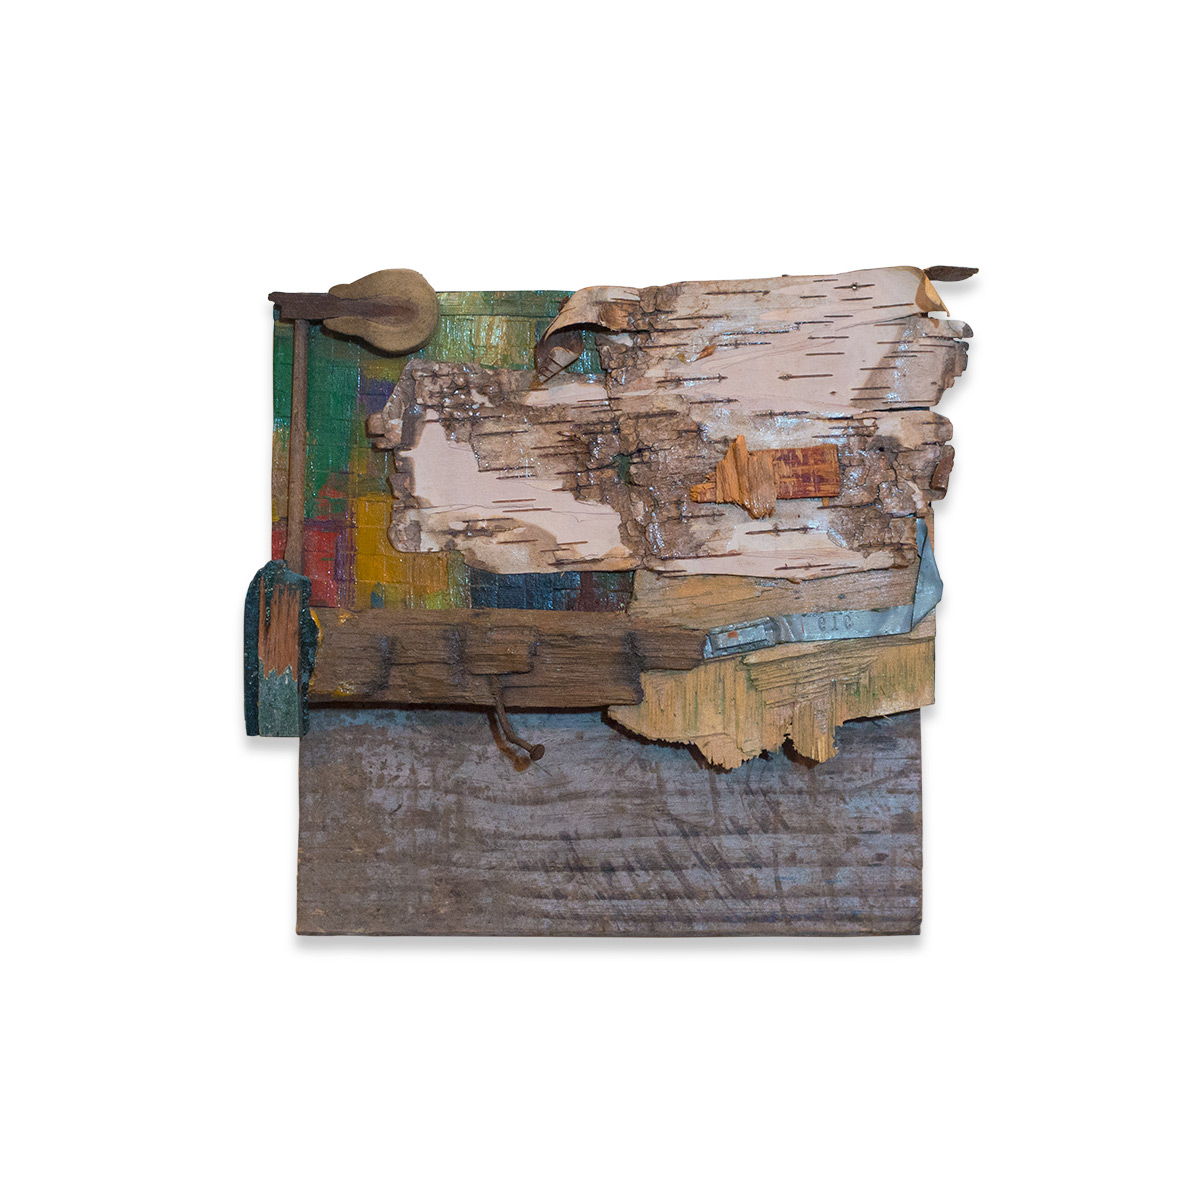  LITTLE LANDSCAPE 2015 found objects/mixed media 9 x 3 x 10 in 